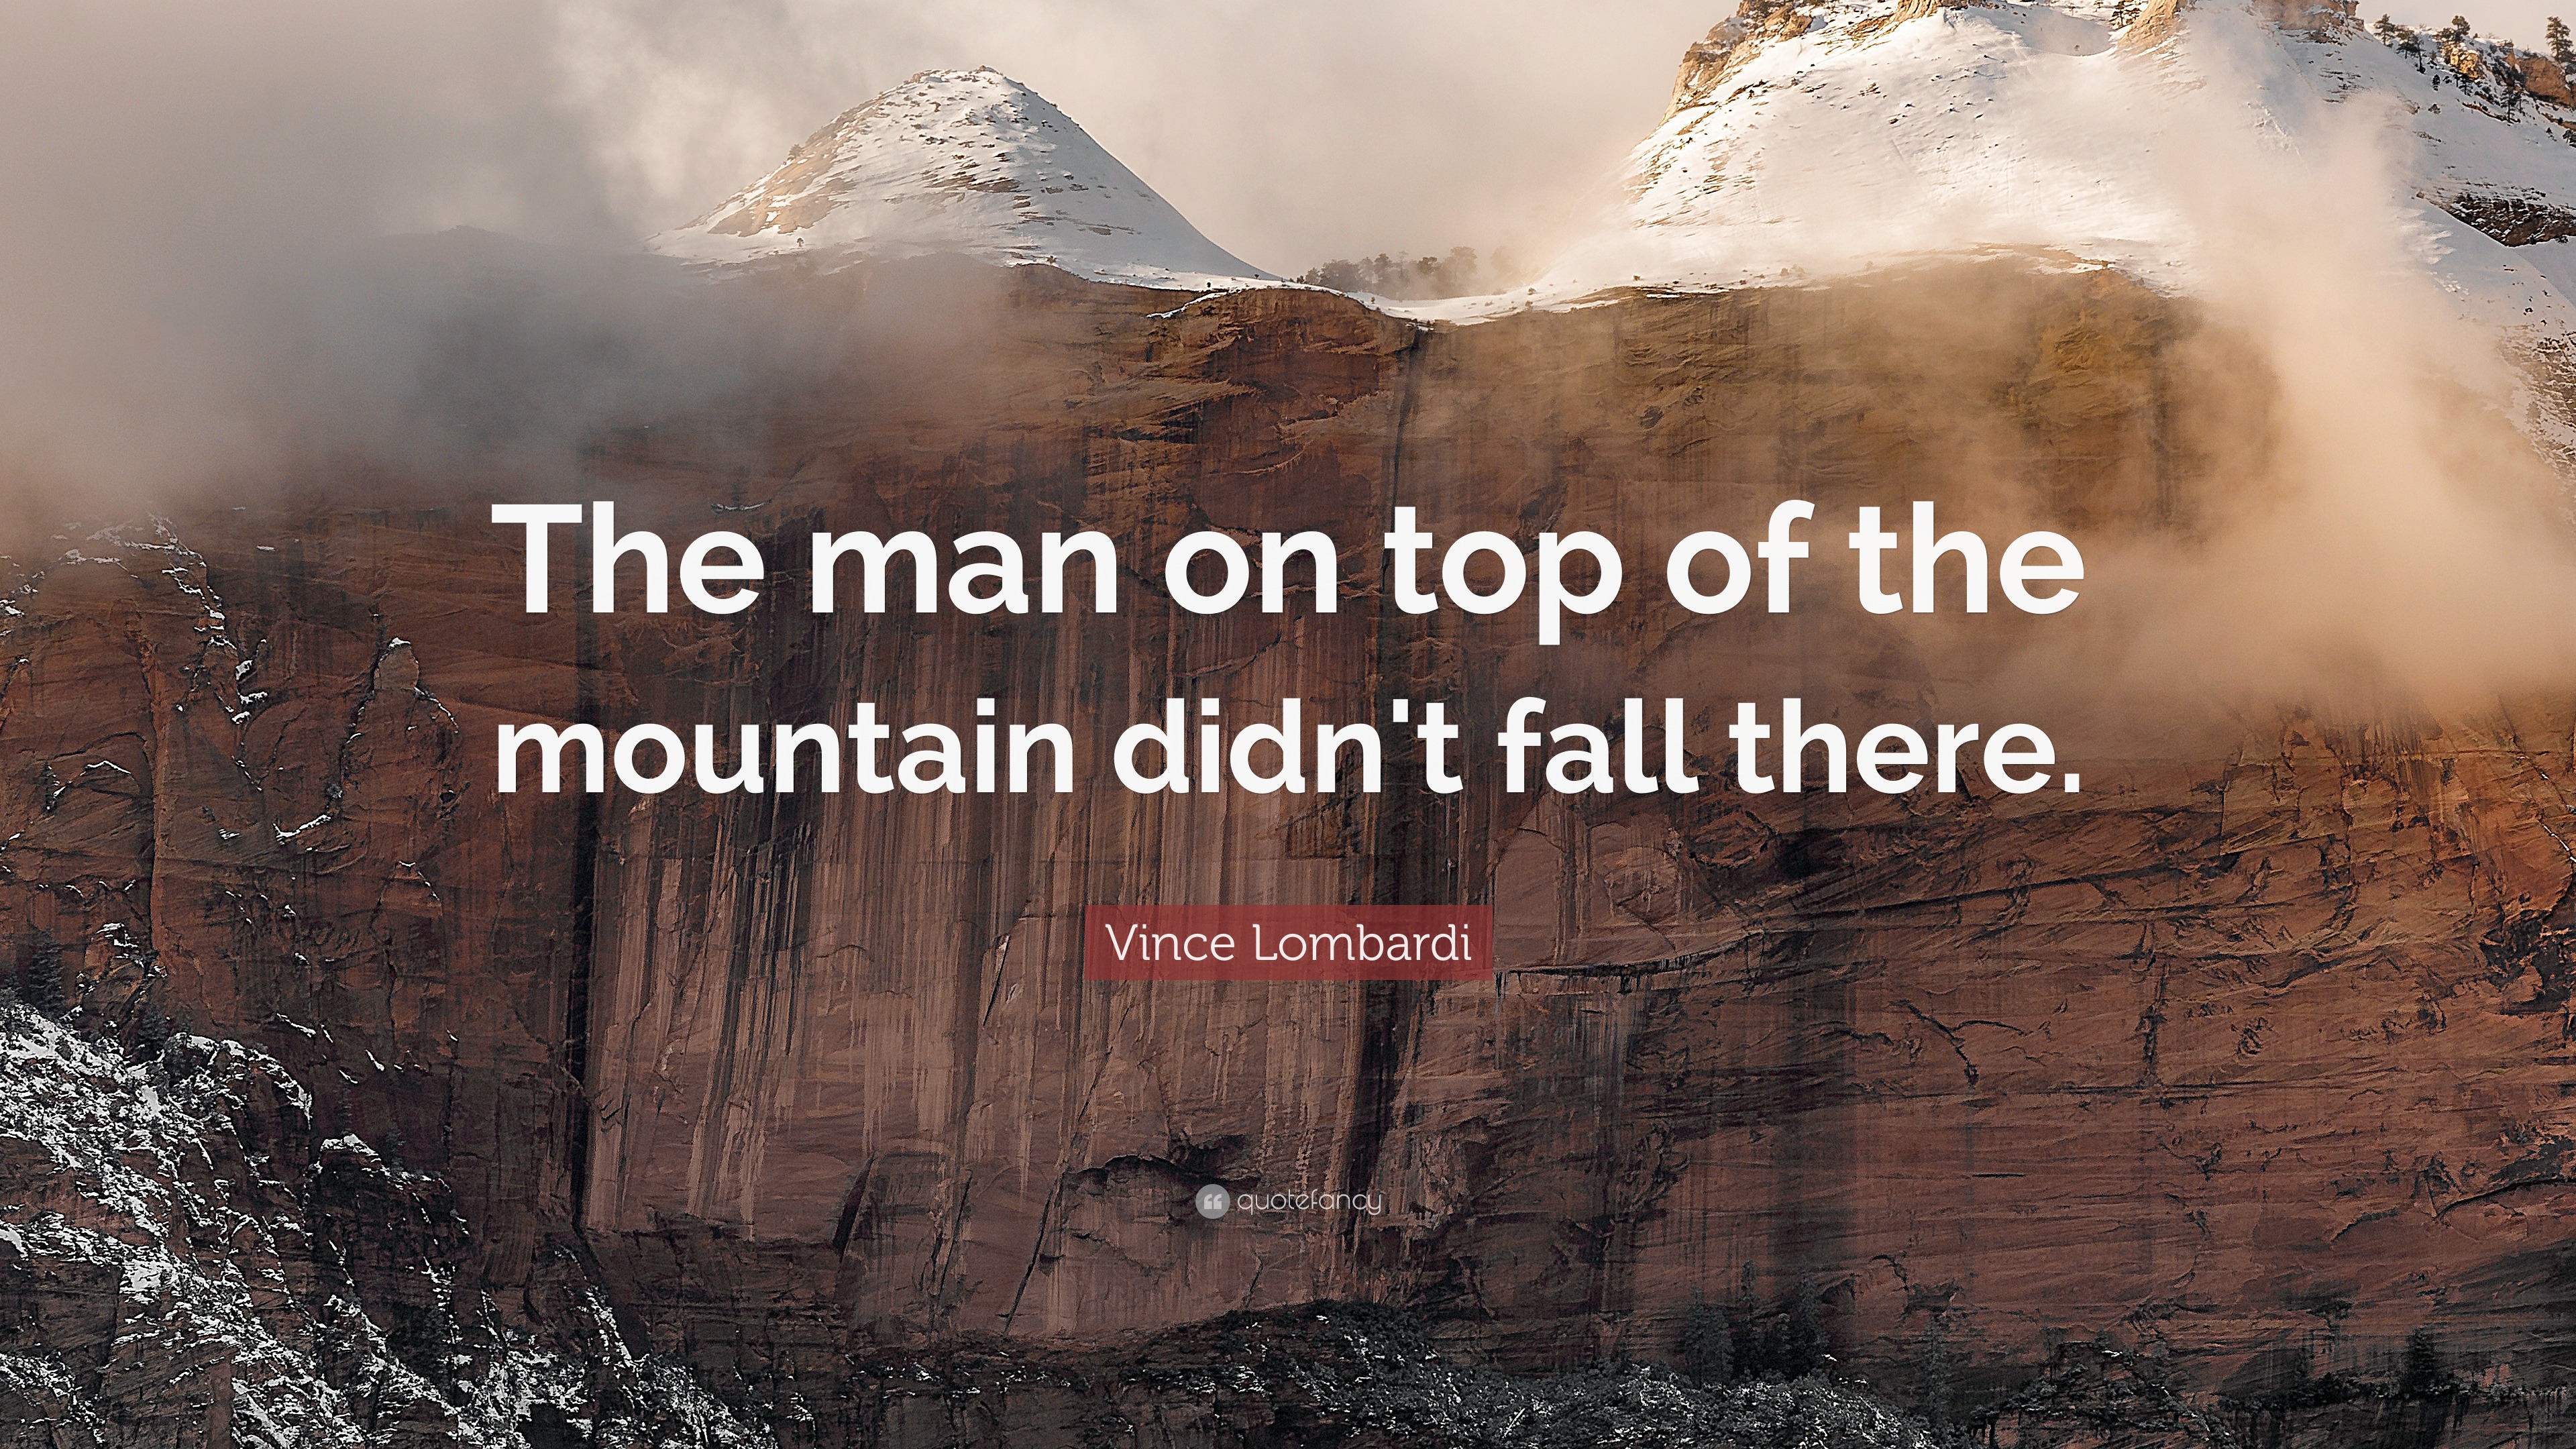 Vince Lombardi Quote: “The man on top of the mountain didn't fall there